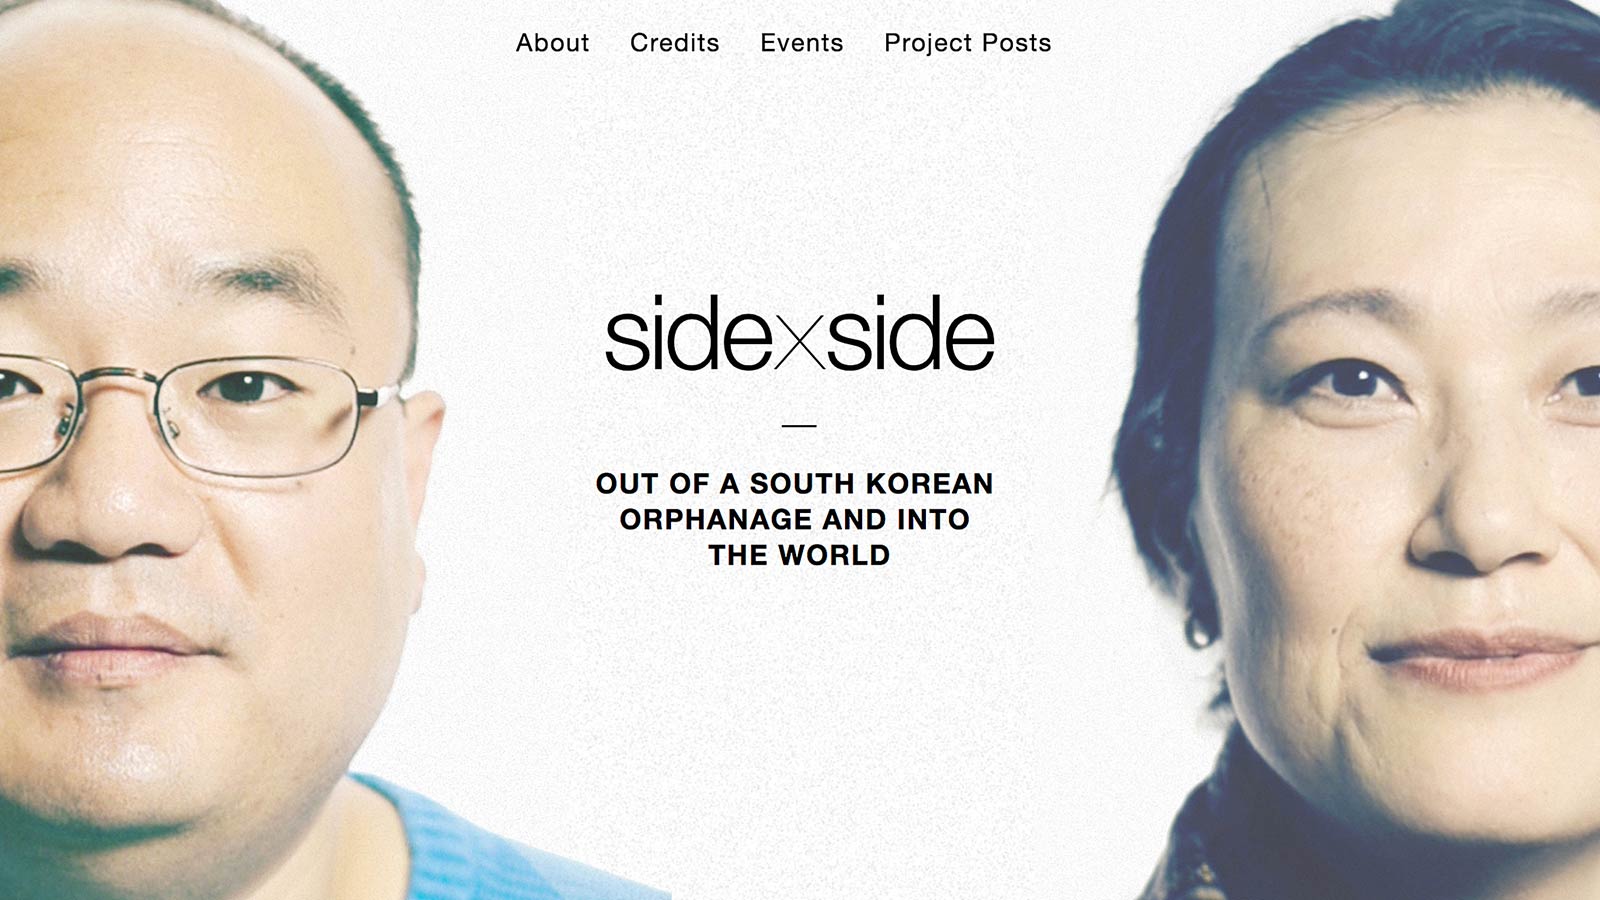 side by side project web homepage with two faces and the documentary title